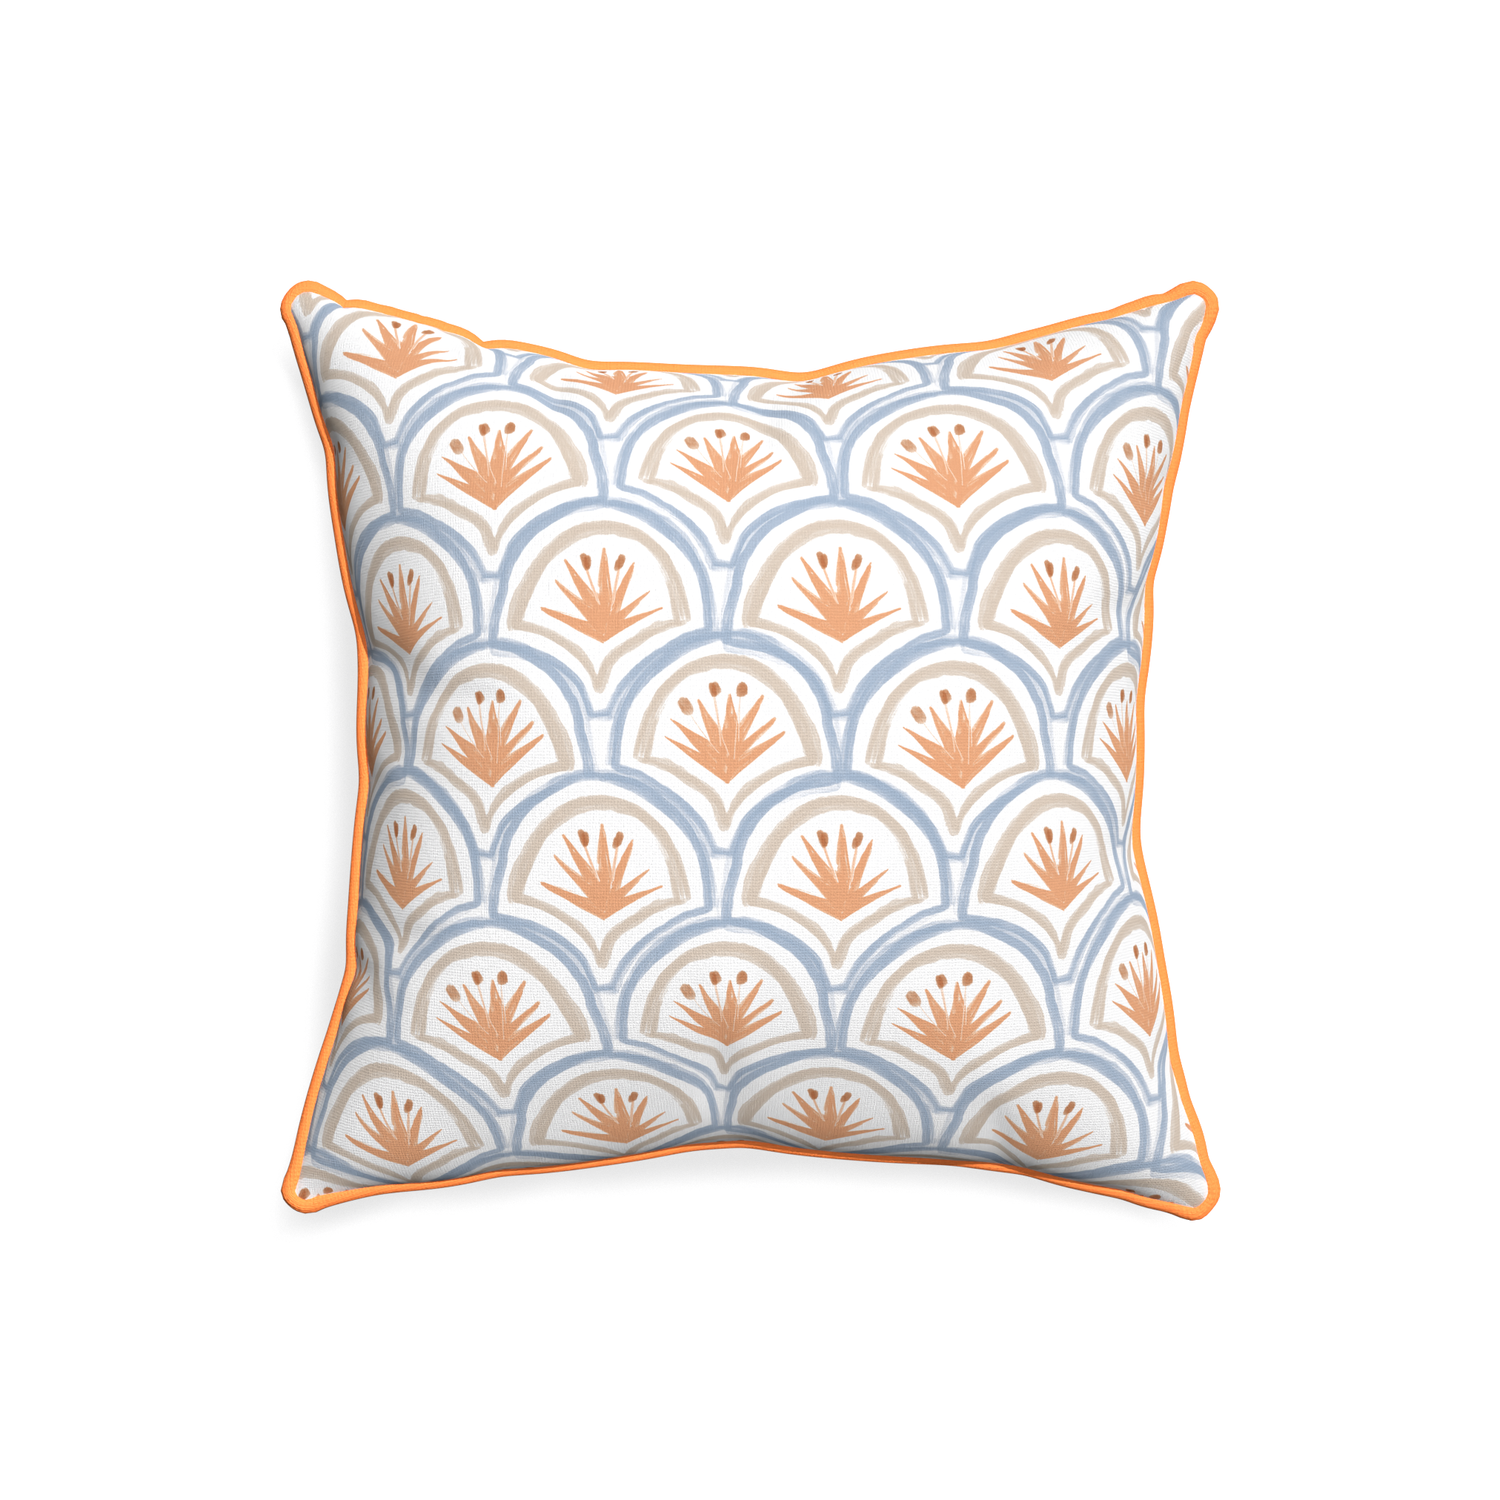 20-square thatcher apricot custom art deco palm patternpillow with clementine piping on white background